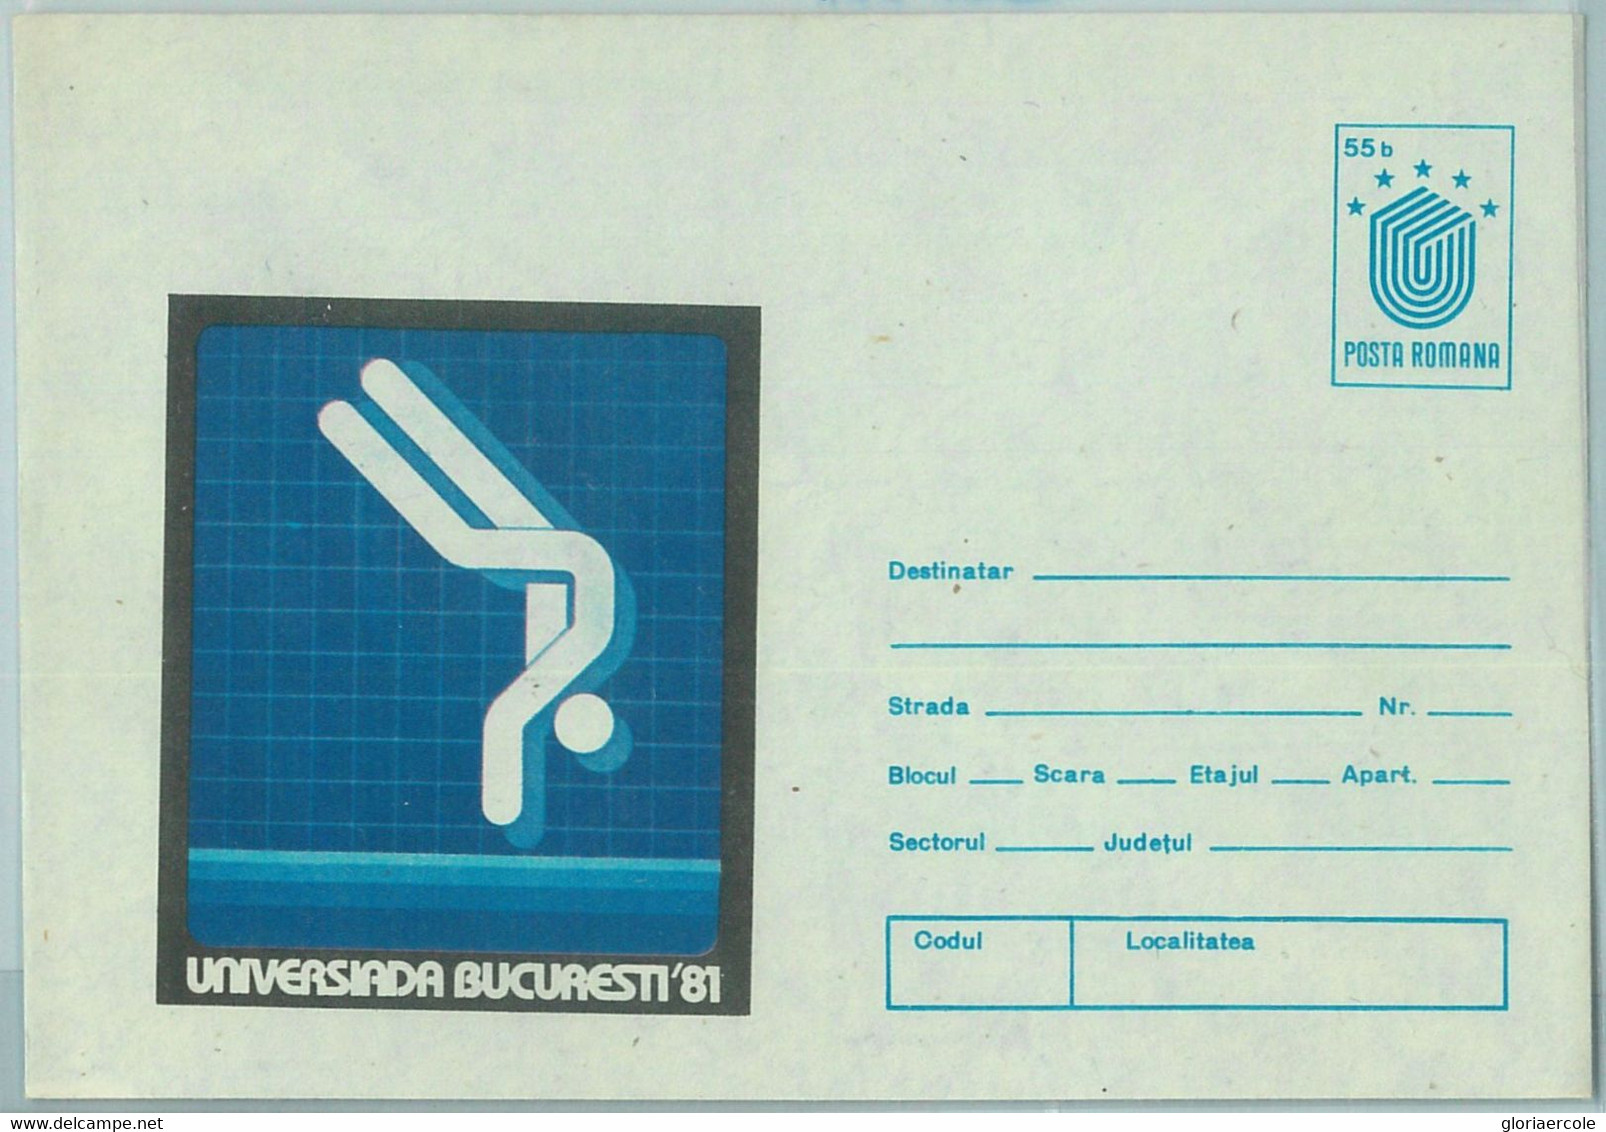 67803 - ROMANIA  - POSTAL HISTORY - STATIONERY COVER - 1981, Universiade Games Bucarest '81, Diving - Tauchen